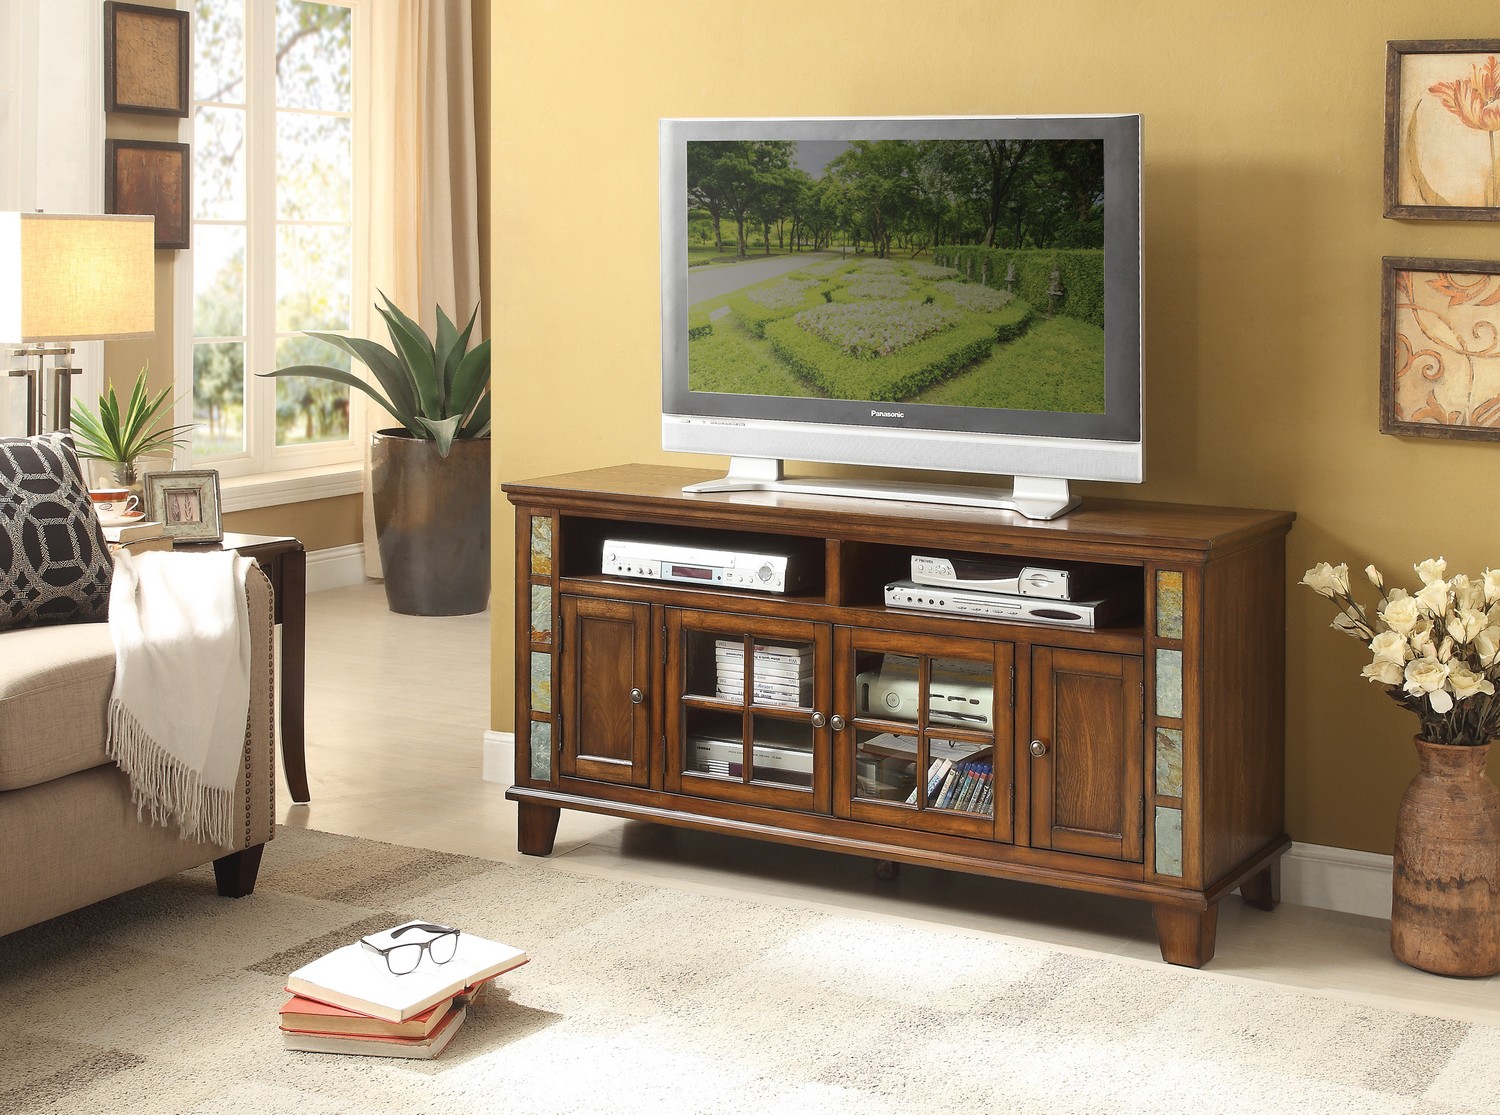 Homelegance Chehalis 60-inch TV Stand with Slate Decor - Brown Cherry